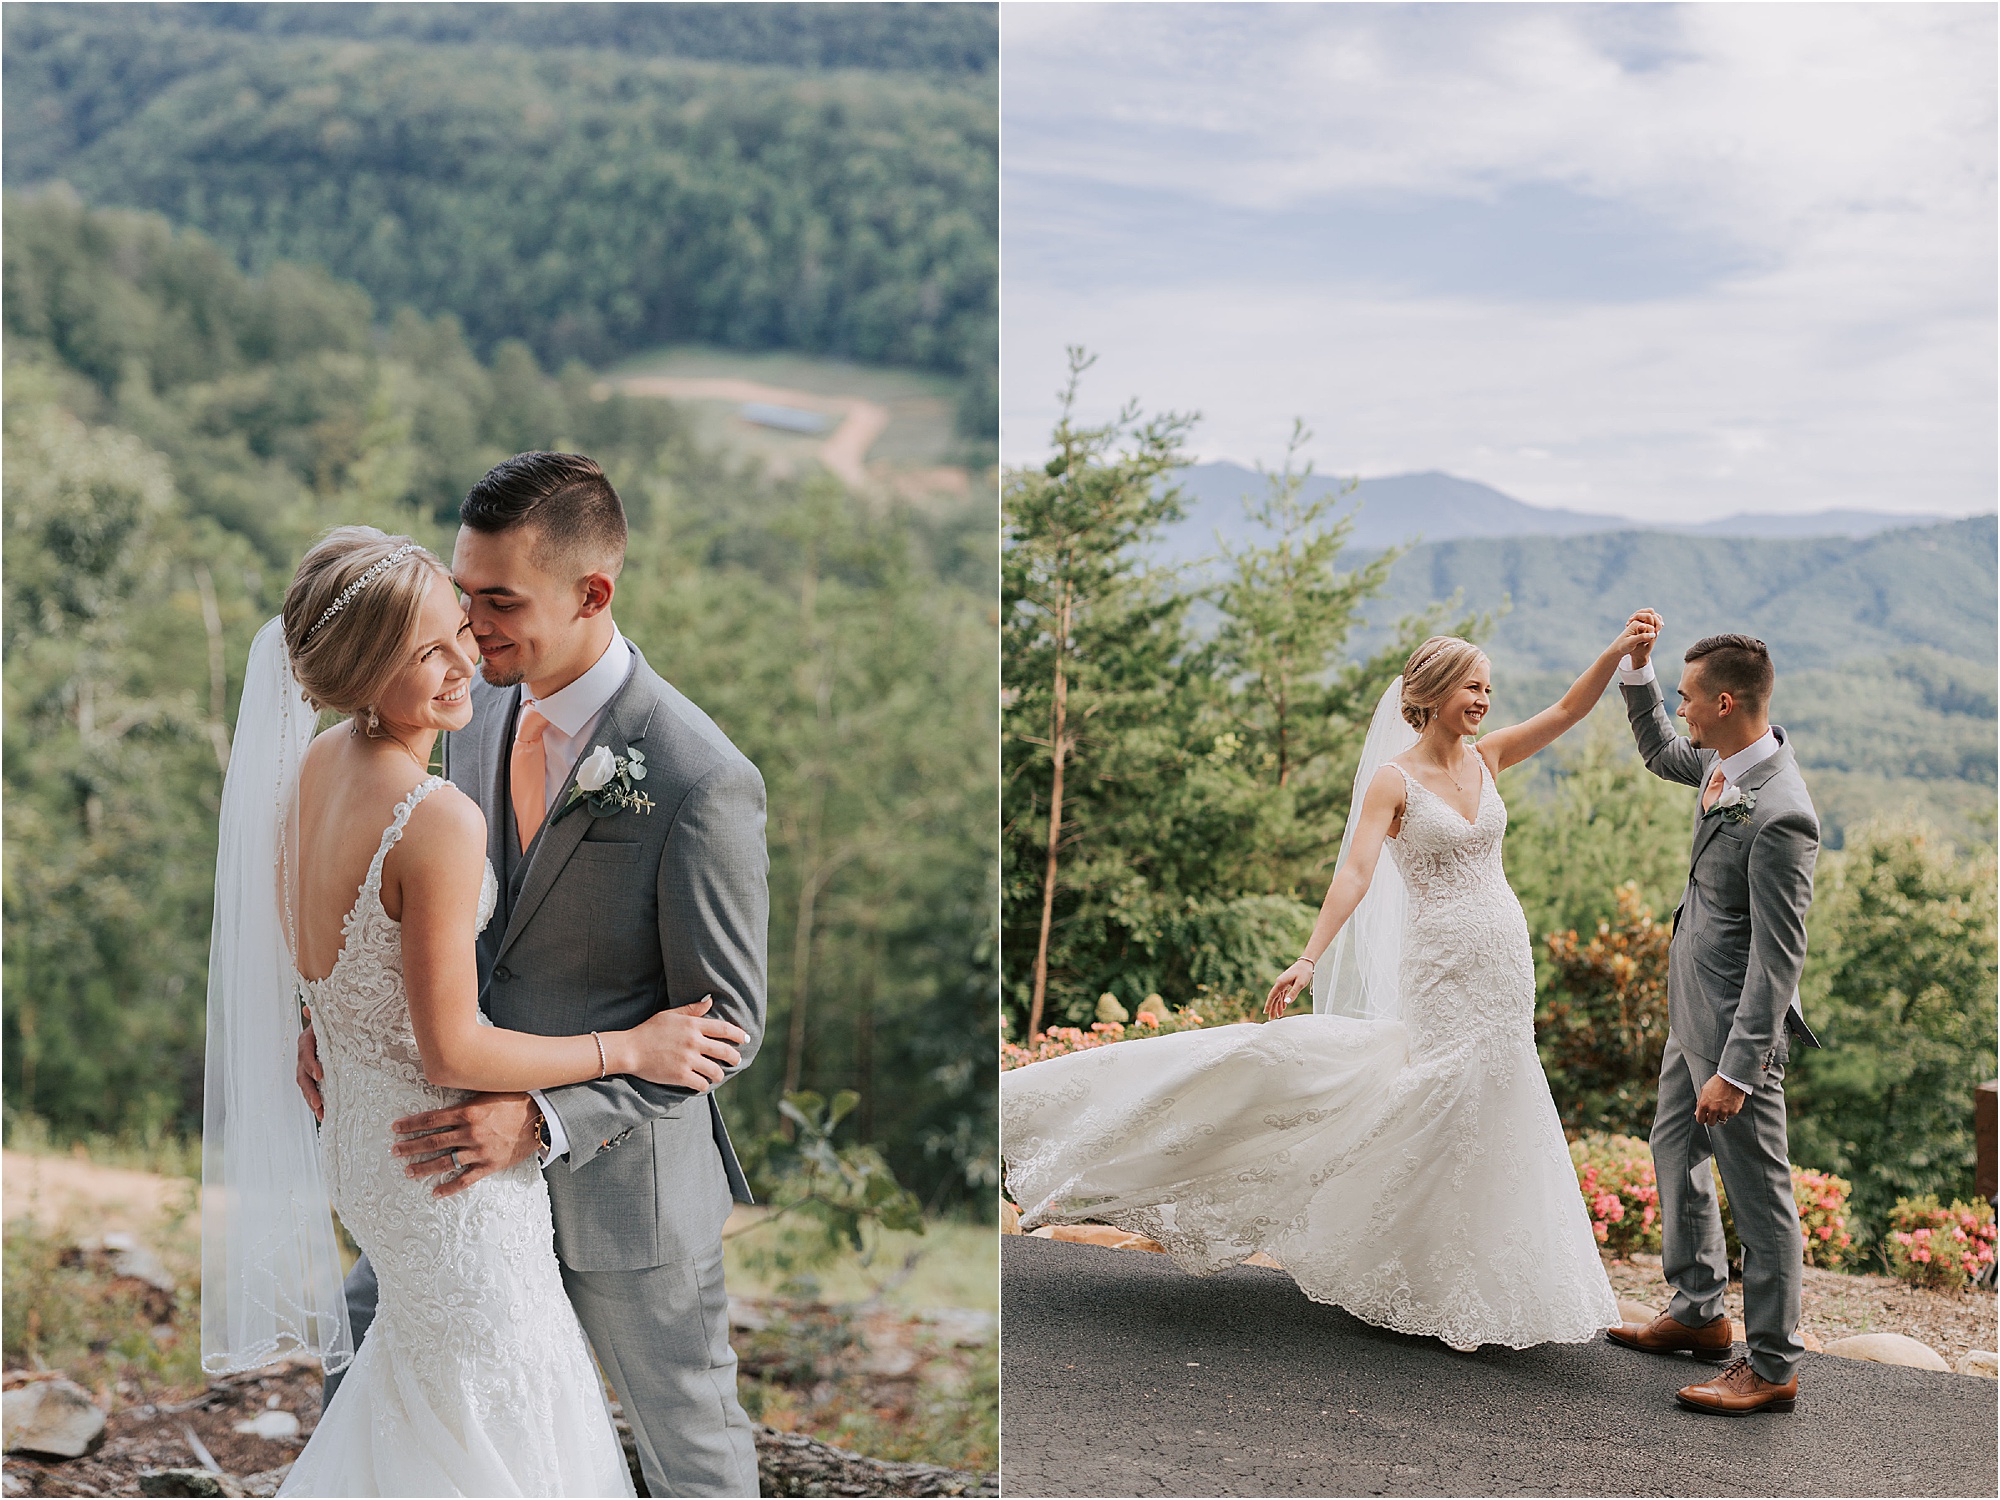 groom and bride kiss and dance at mountain wedding